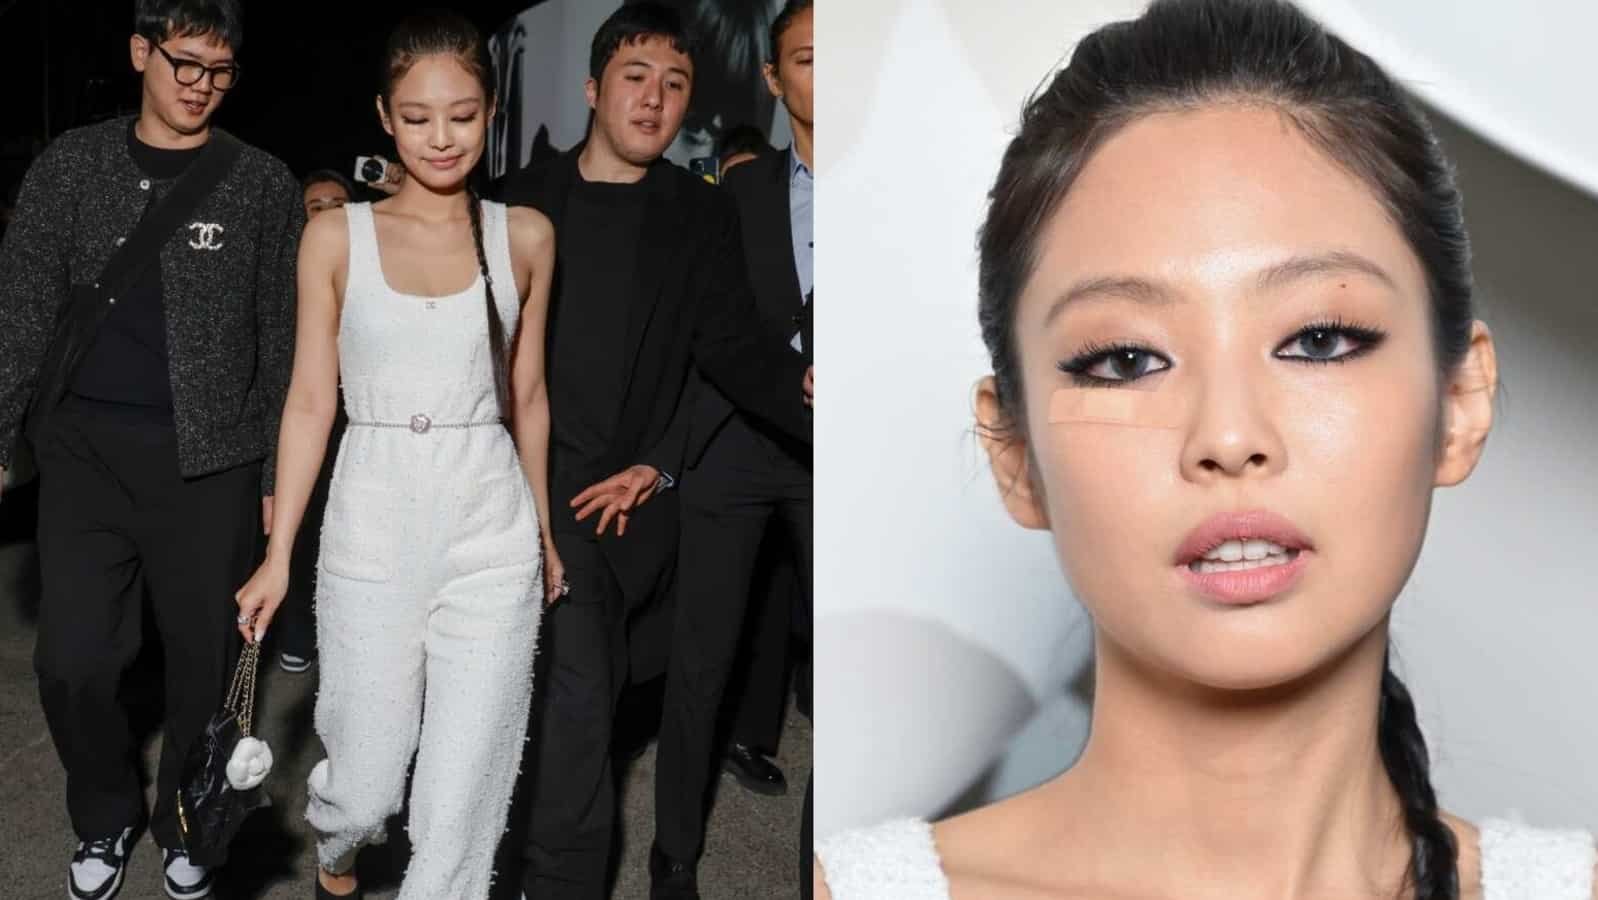 Blackpink's Jennie attends Paris Fashion Week with band-aid on face ...